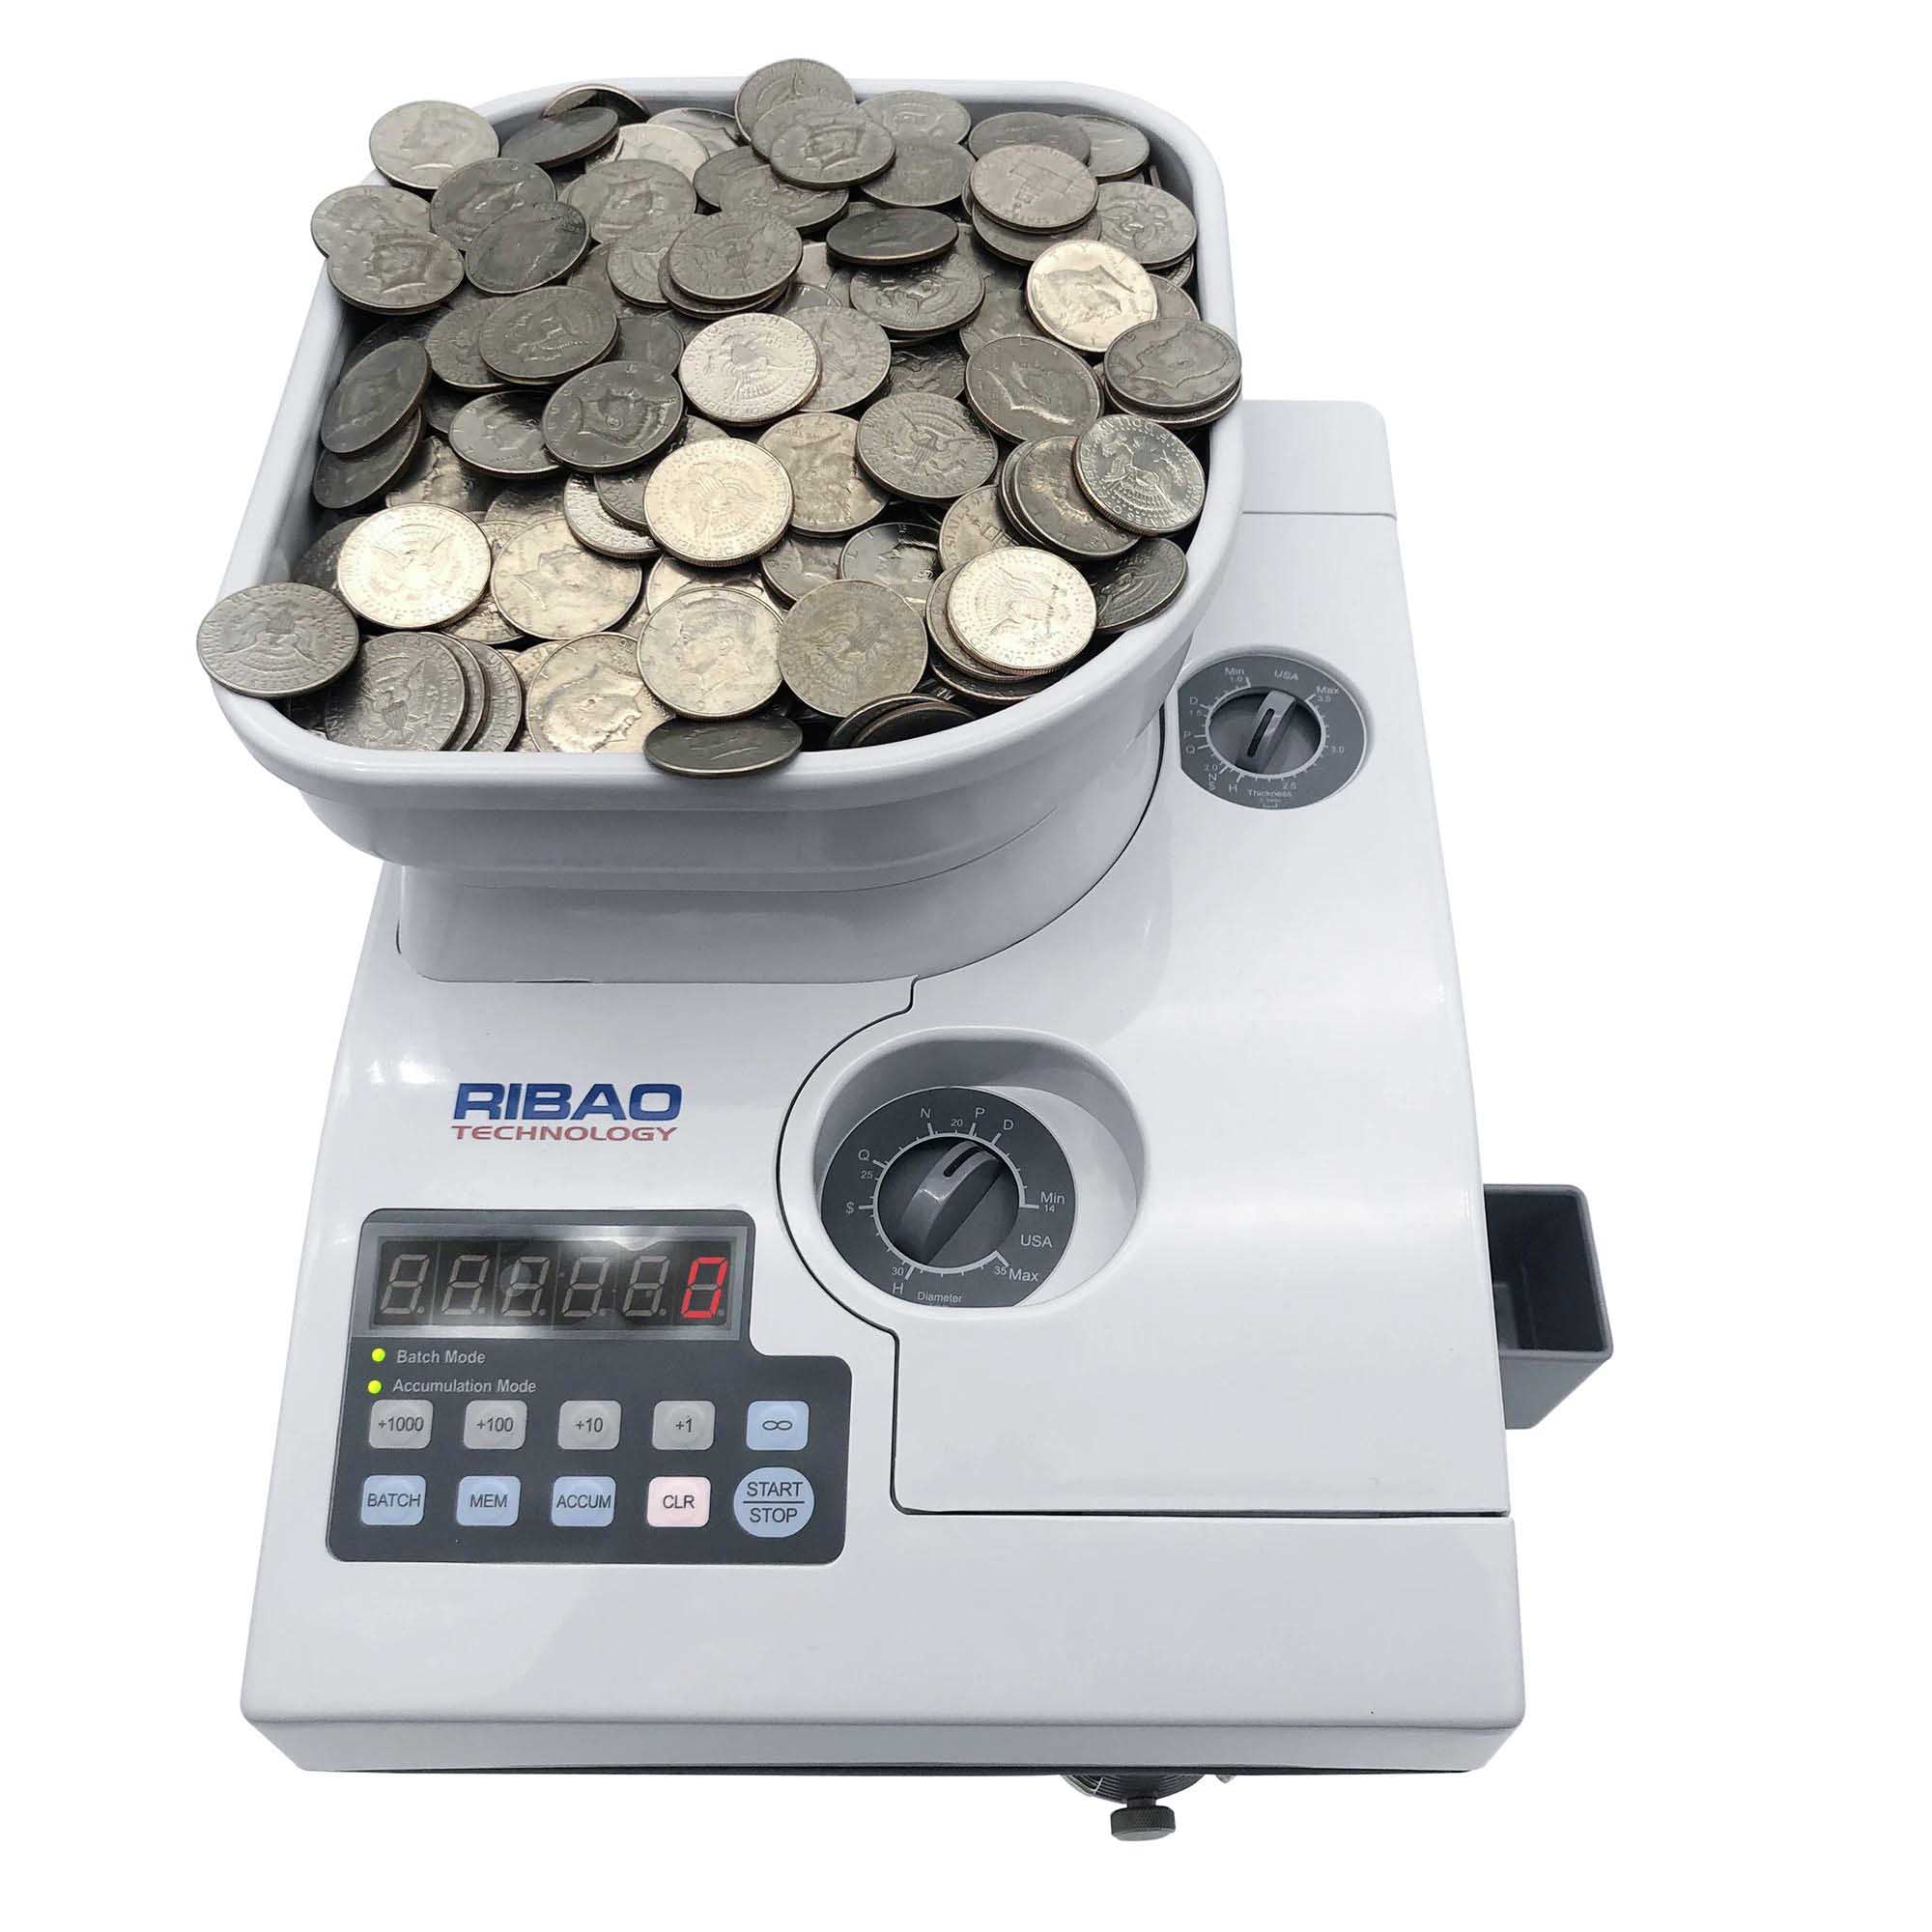 Semacon S-45 Heavy Duty Coin Counter, Coin Packager (S-45)